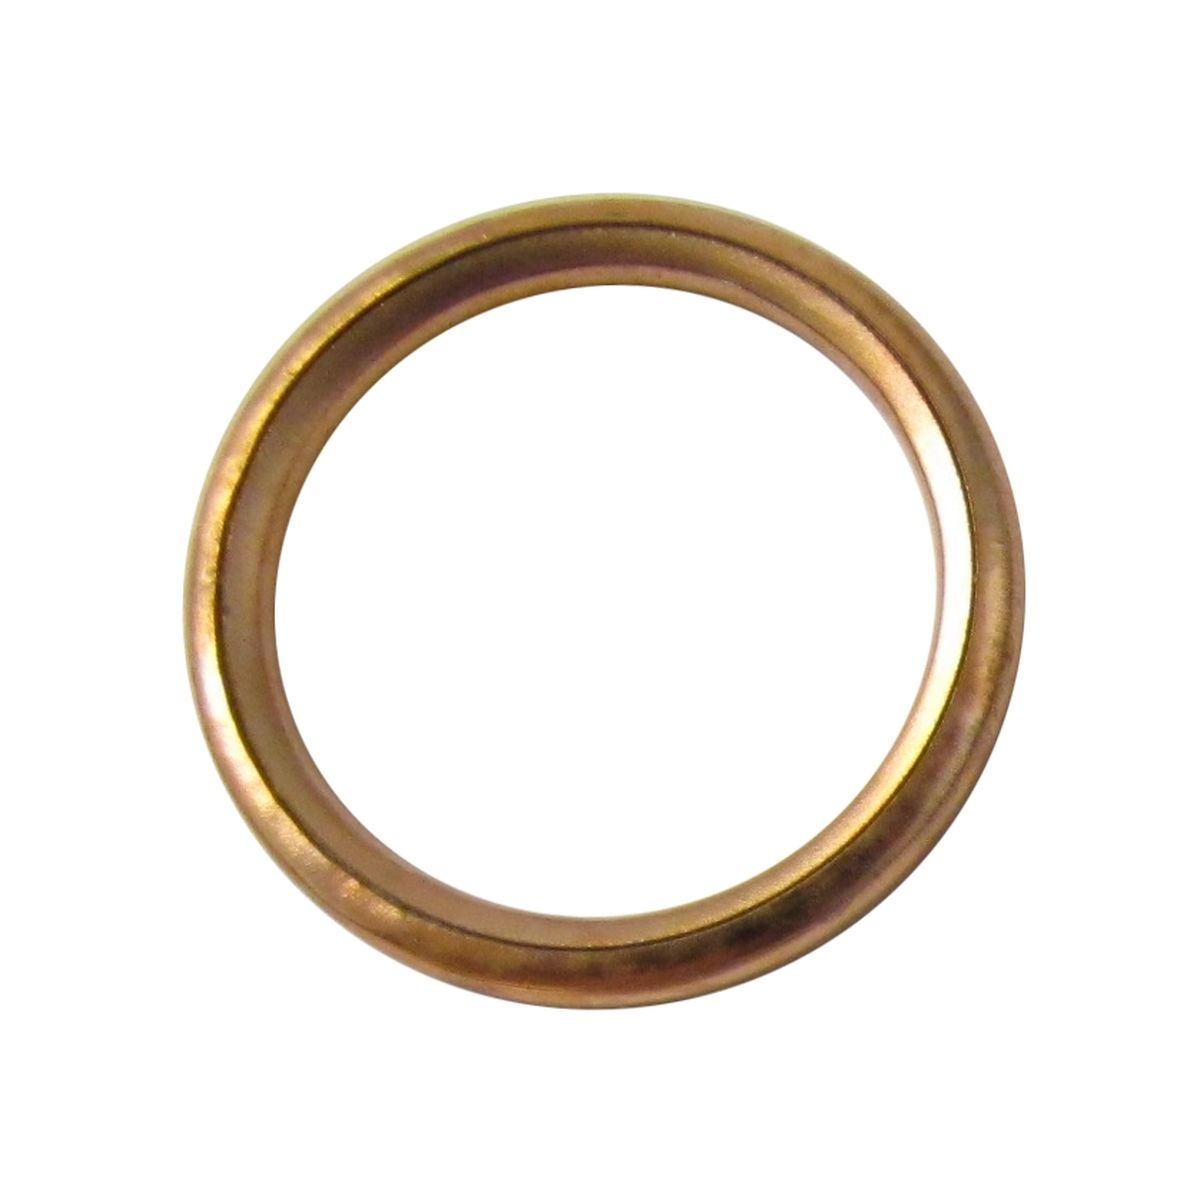 Exhaust Gasket Copper 1 for 2001 Raleigh Mall 50cc Speedfight Peugeot A C Genuine Free Shipping